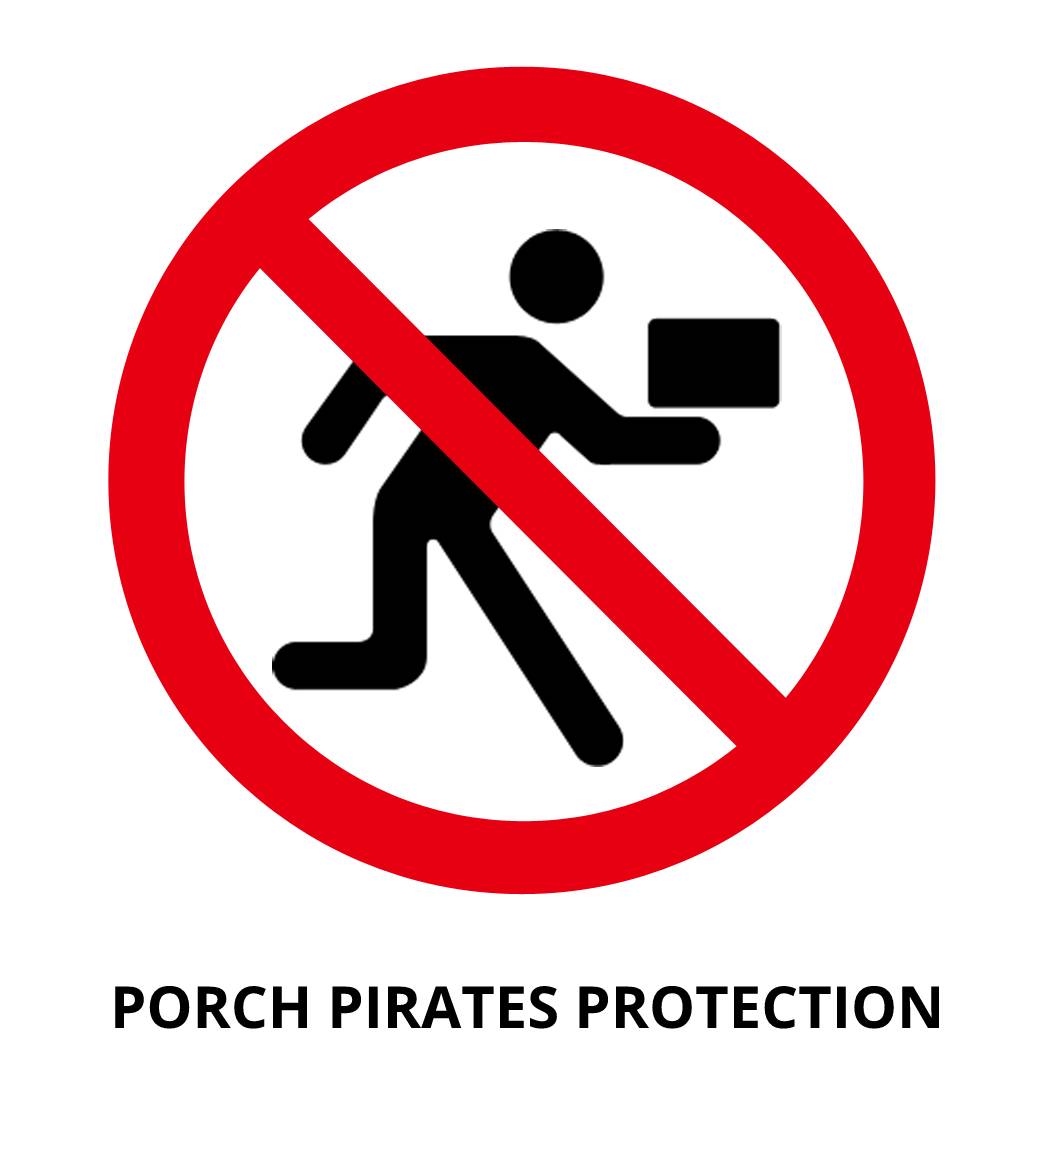 Porch Pirates Protection (liw)